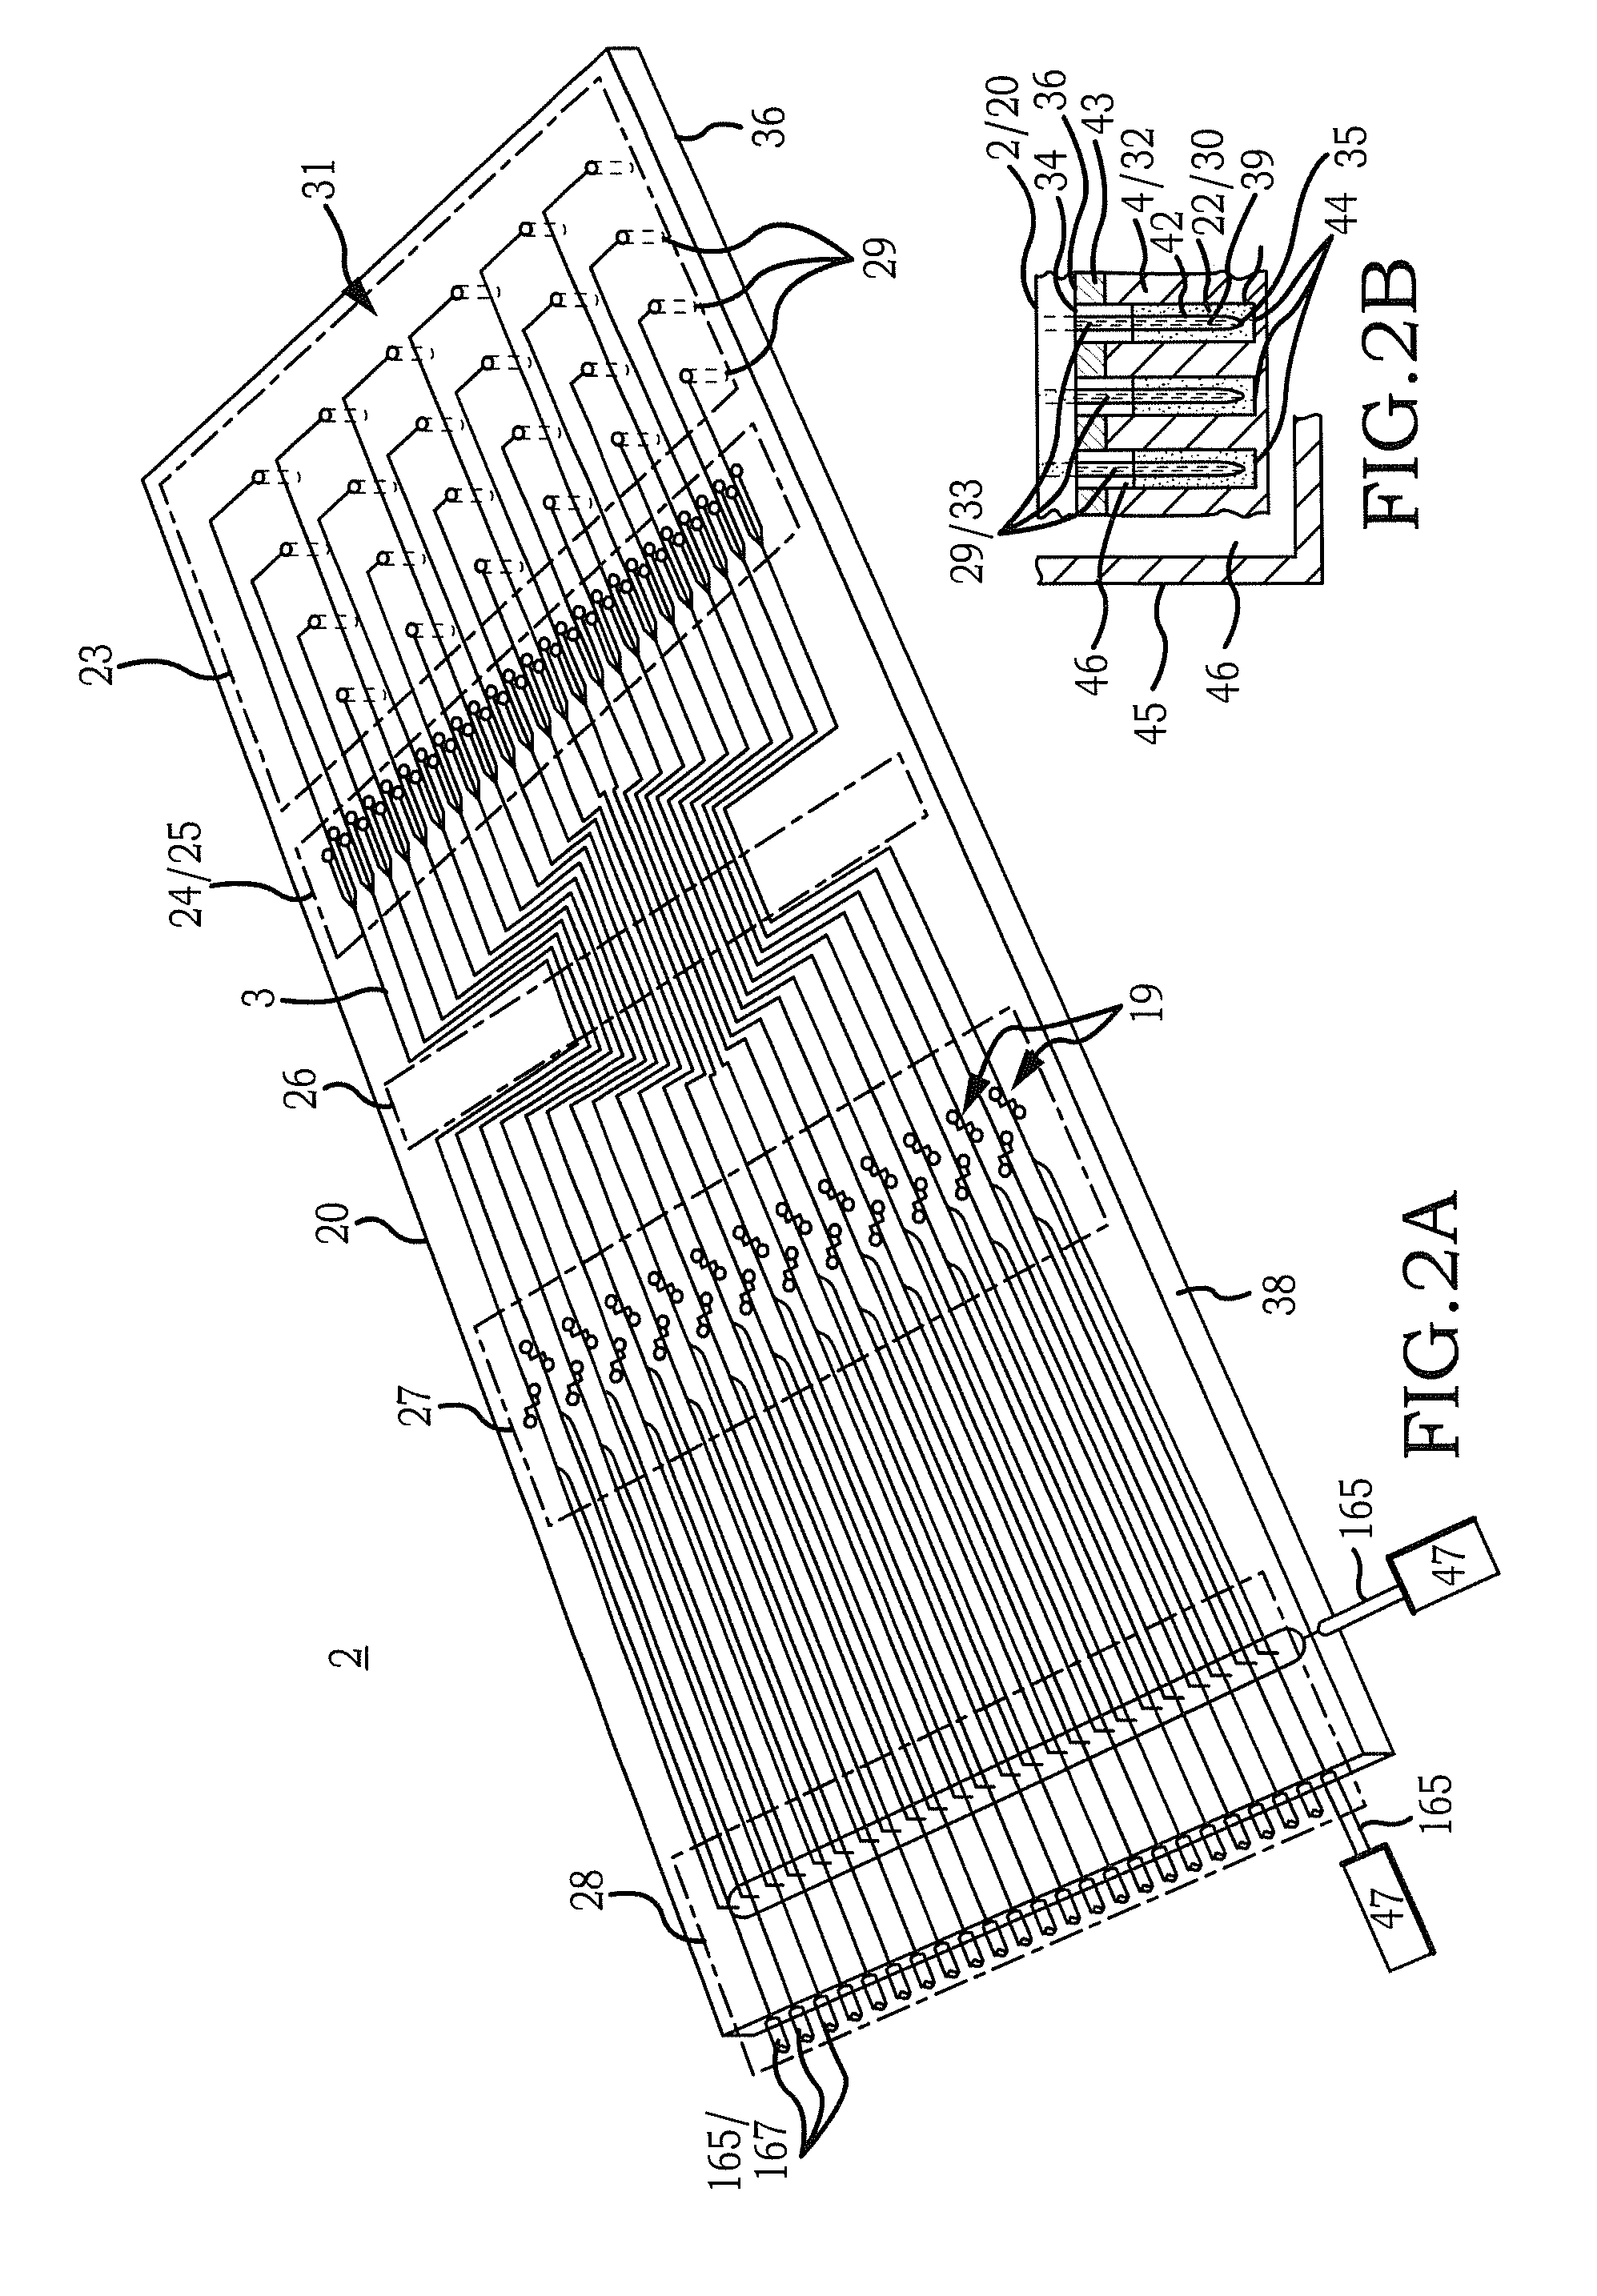 Multiple Flow Channel Particle Analysis System